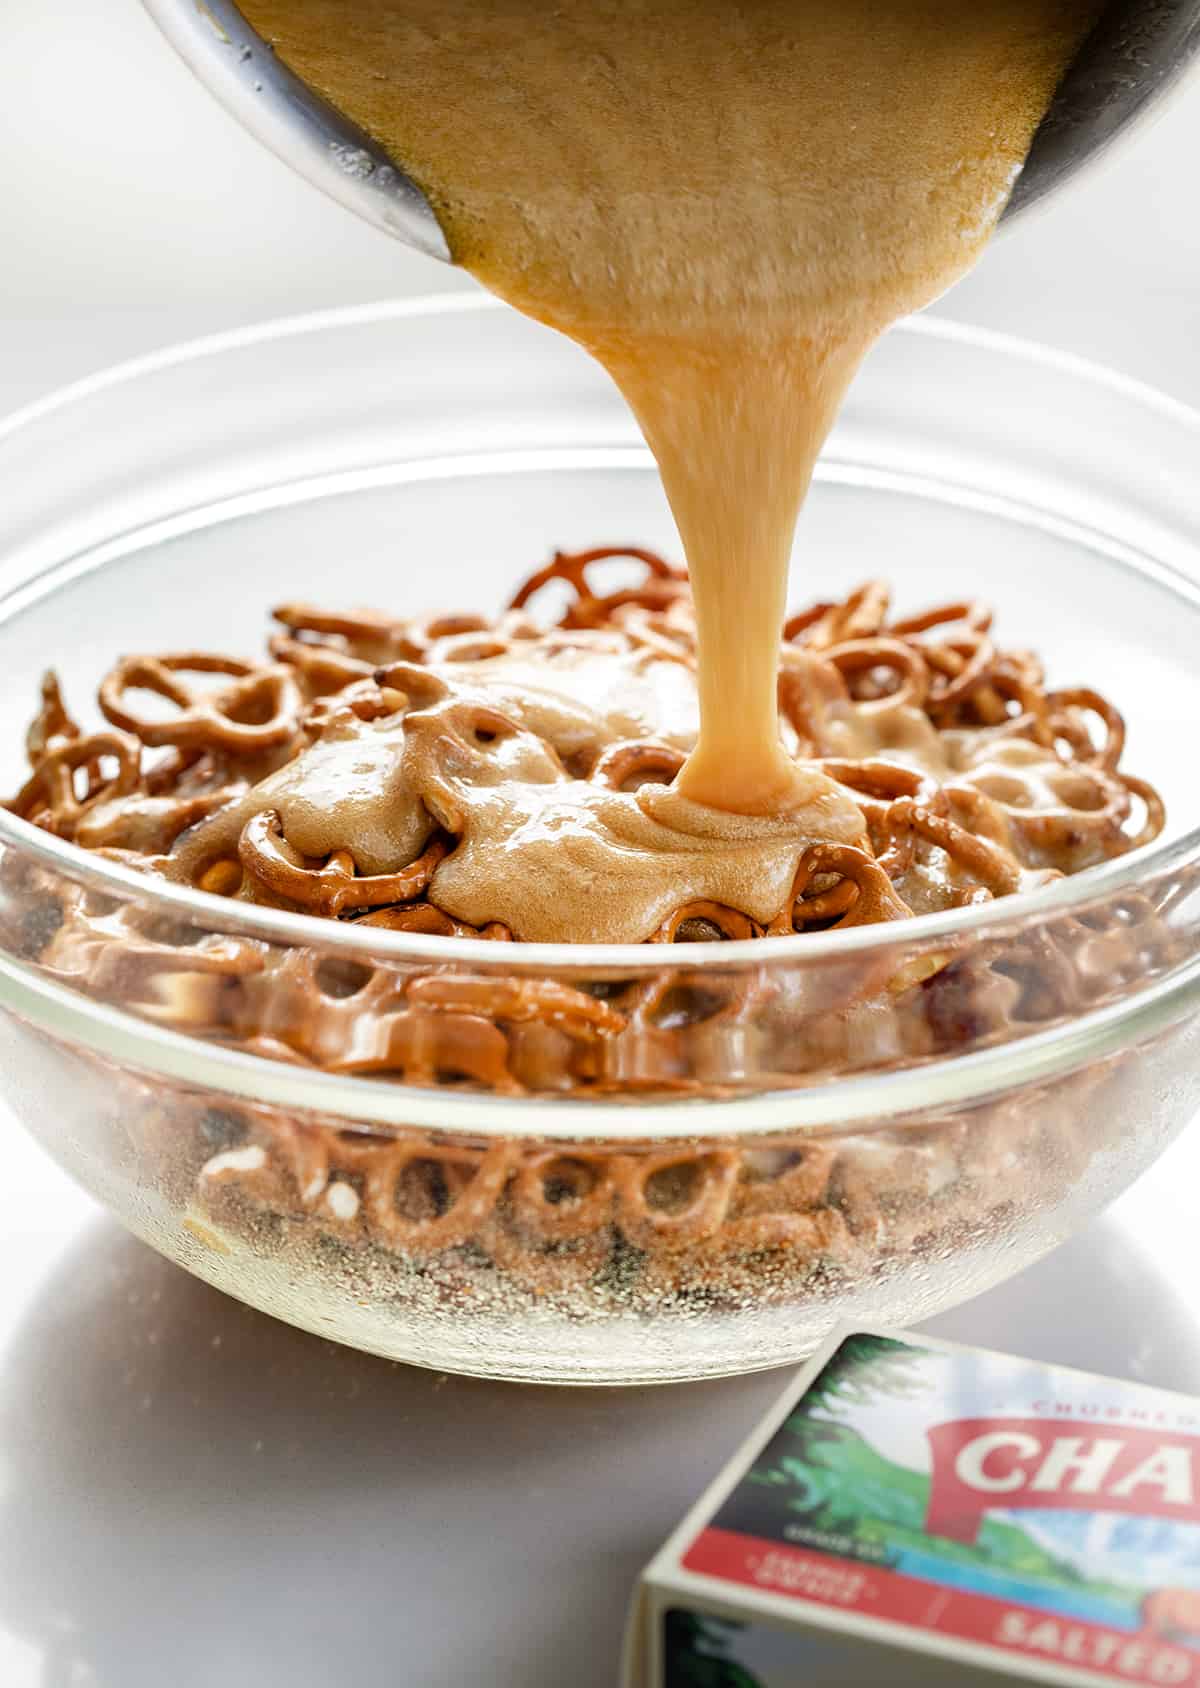 Pouring toffee over pretzels to make Butter Toffee Pretzels.